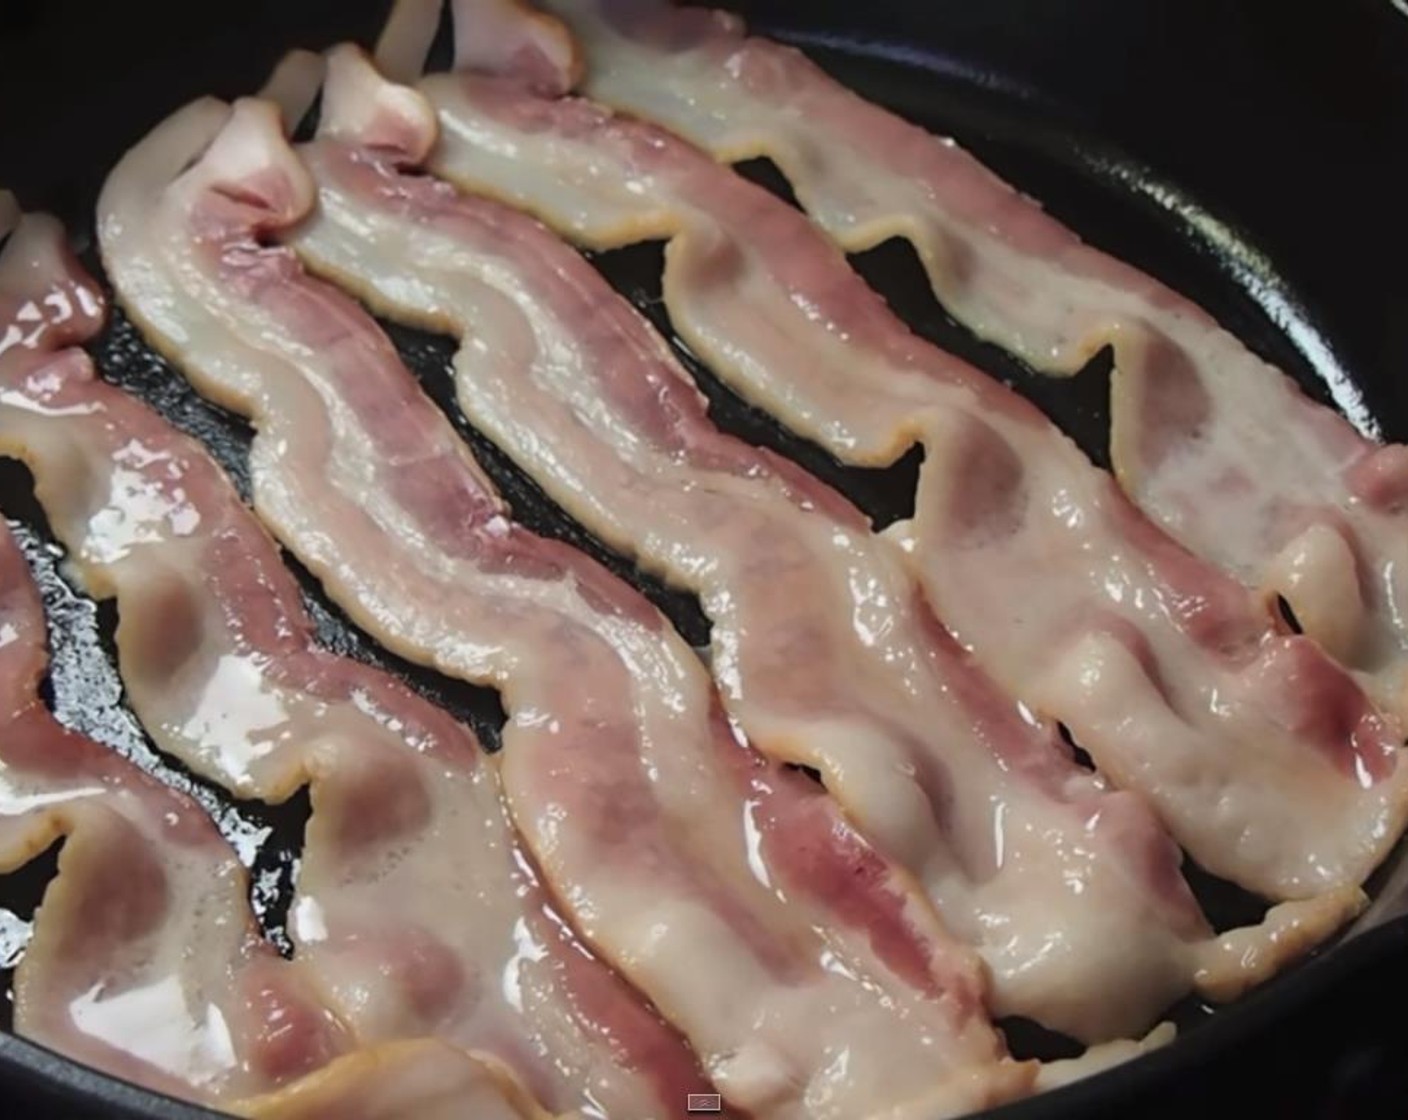 step 2 In a skillet, cook the Bacon (6 slices). When crispy, drain on a paper towel lined plate and set aside. Reserve 4 tablespoon of the bacon grease. Cook the Penne Pasta (6 oz) in salted water according to package's instructions. Reserve 2 tablespoons of pasta water.